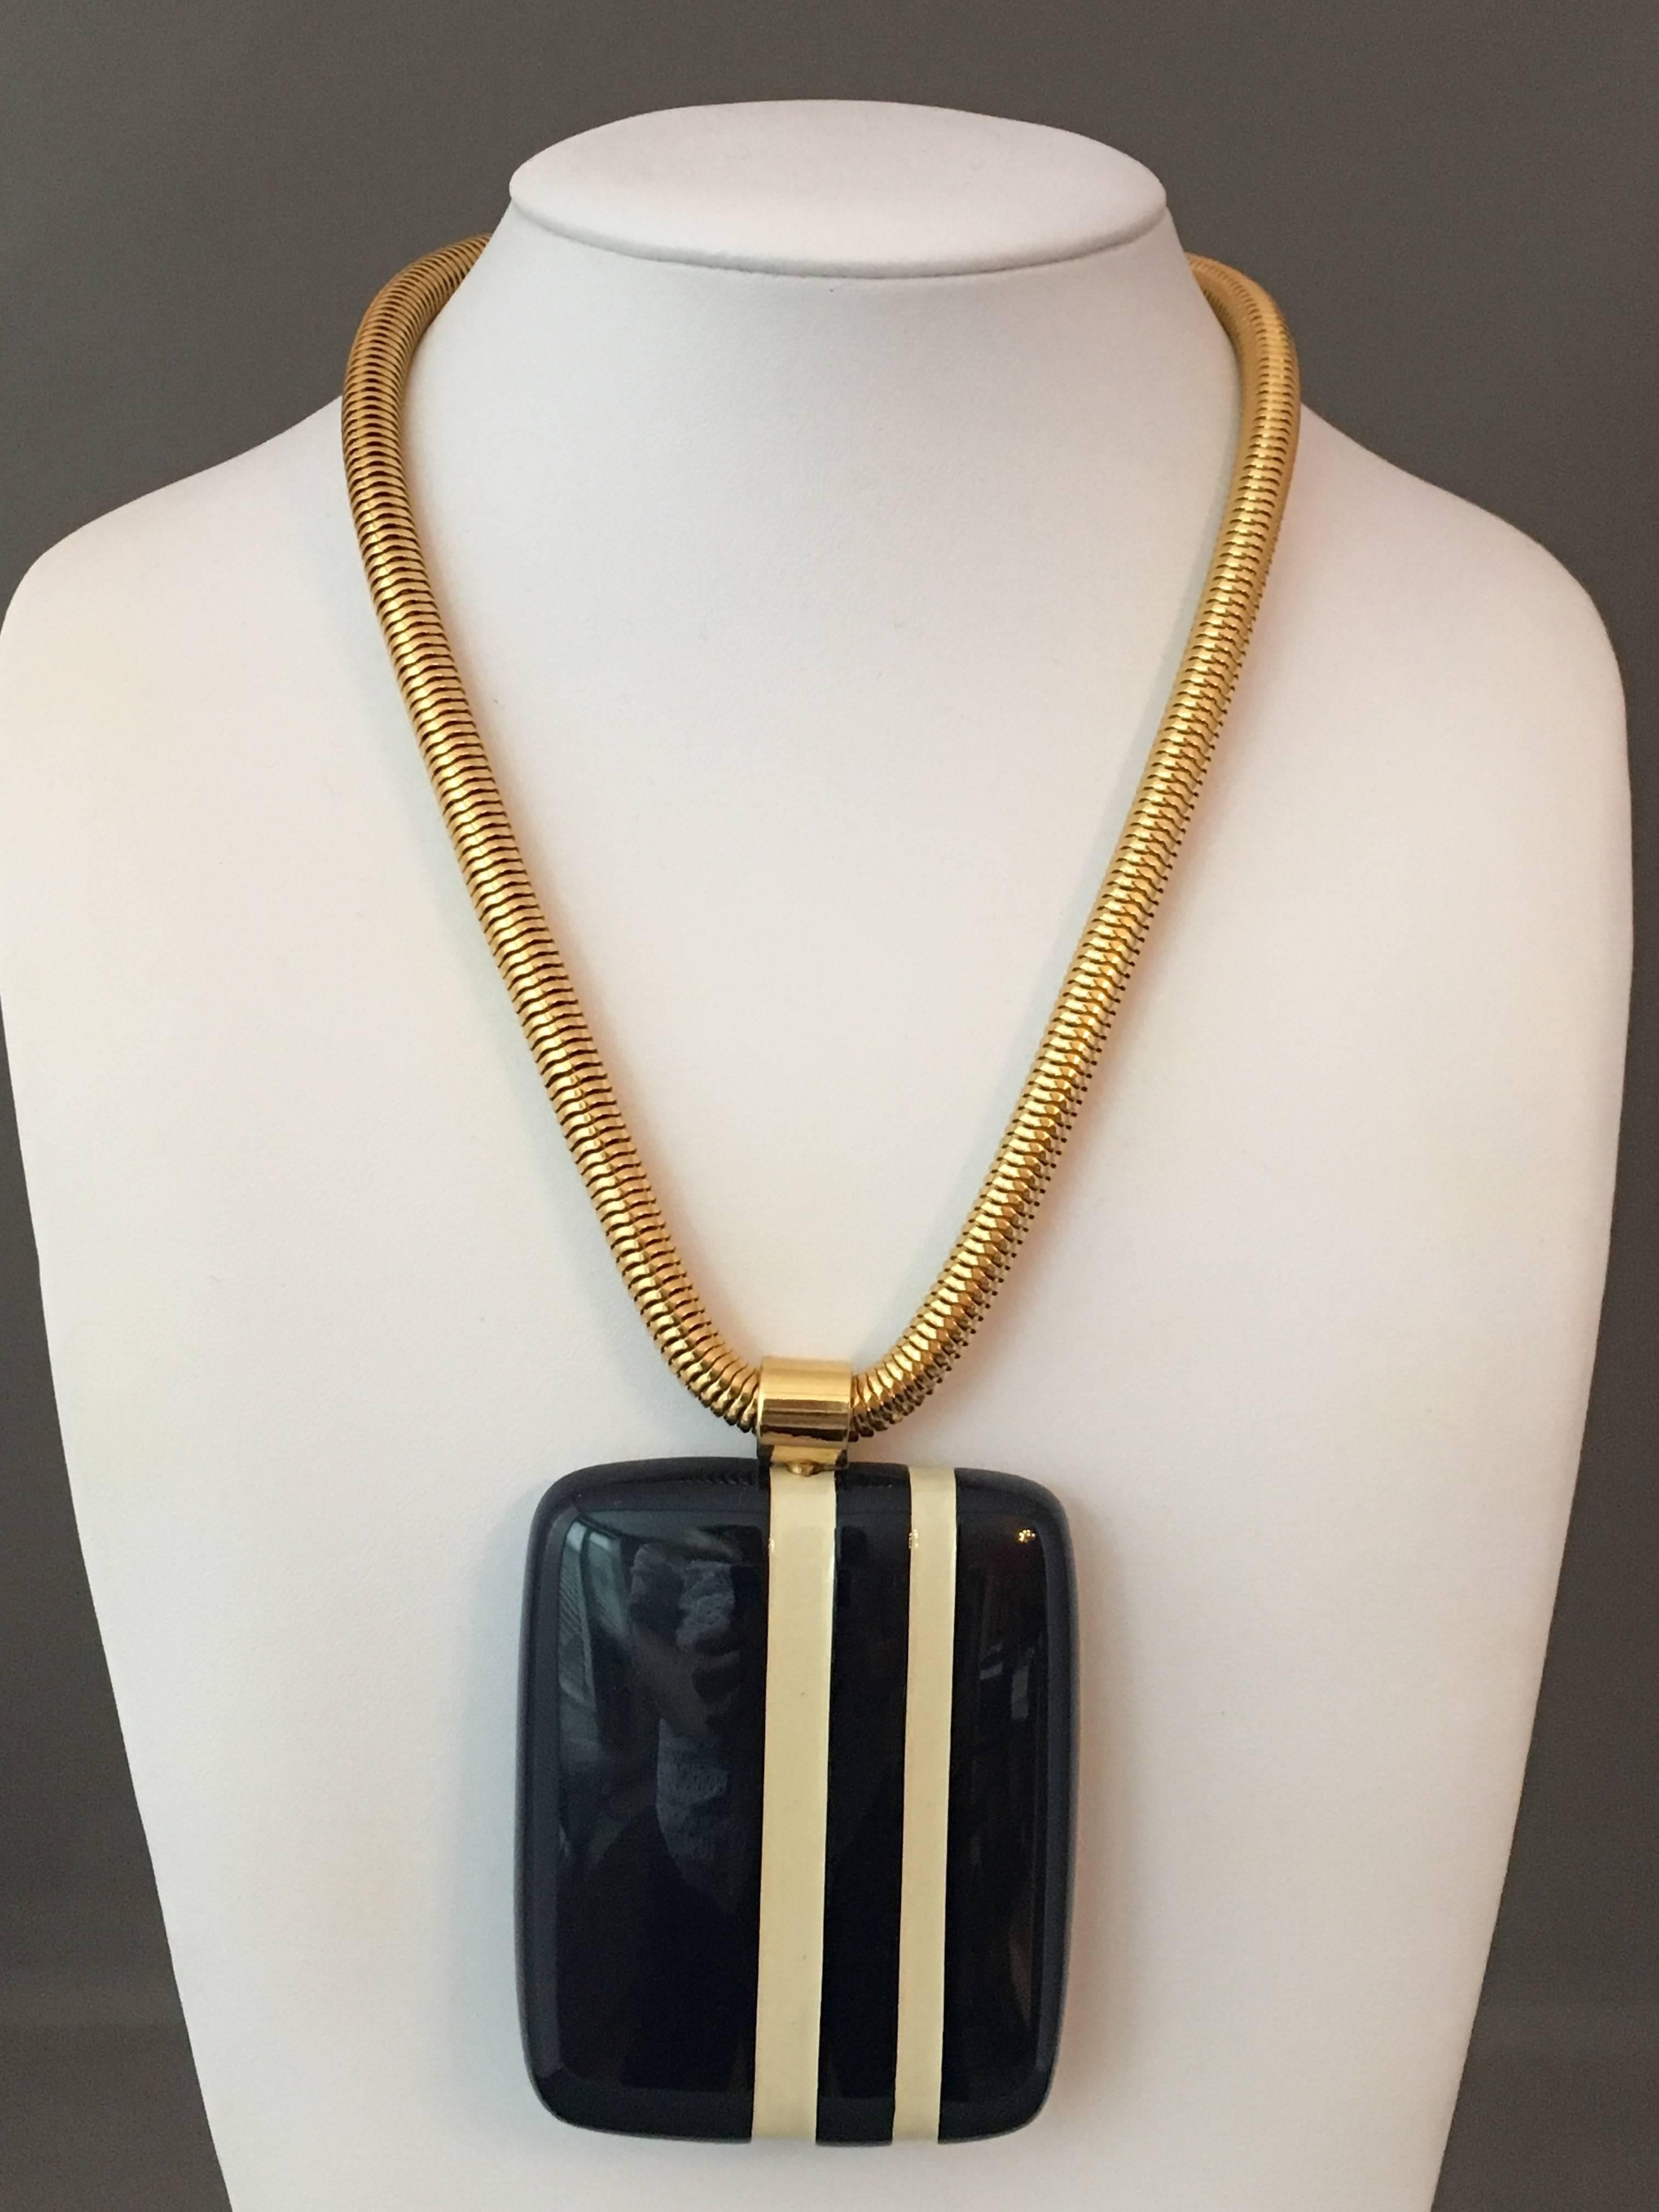 Women's Lanvin Navy and White Striped Pendant Necklace, 1970s For Sale